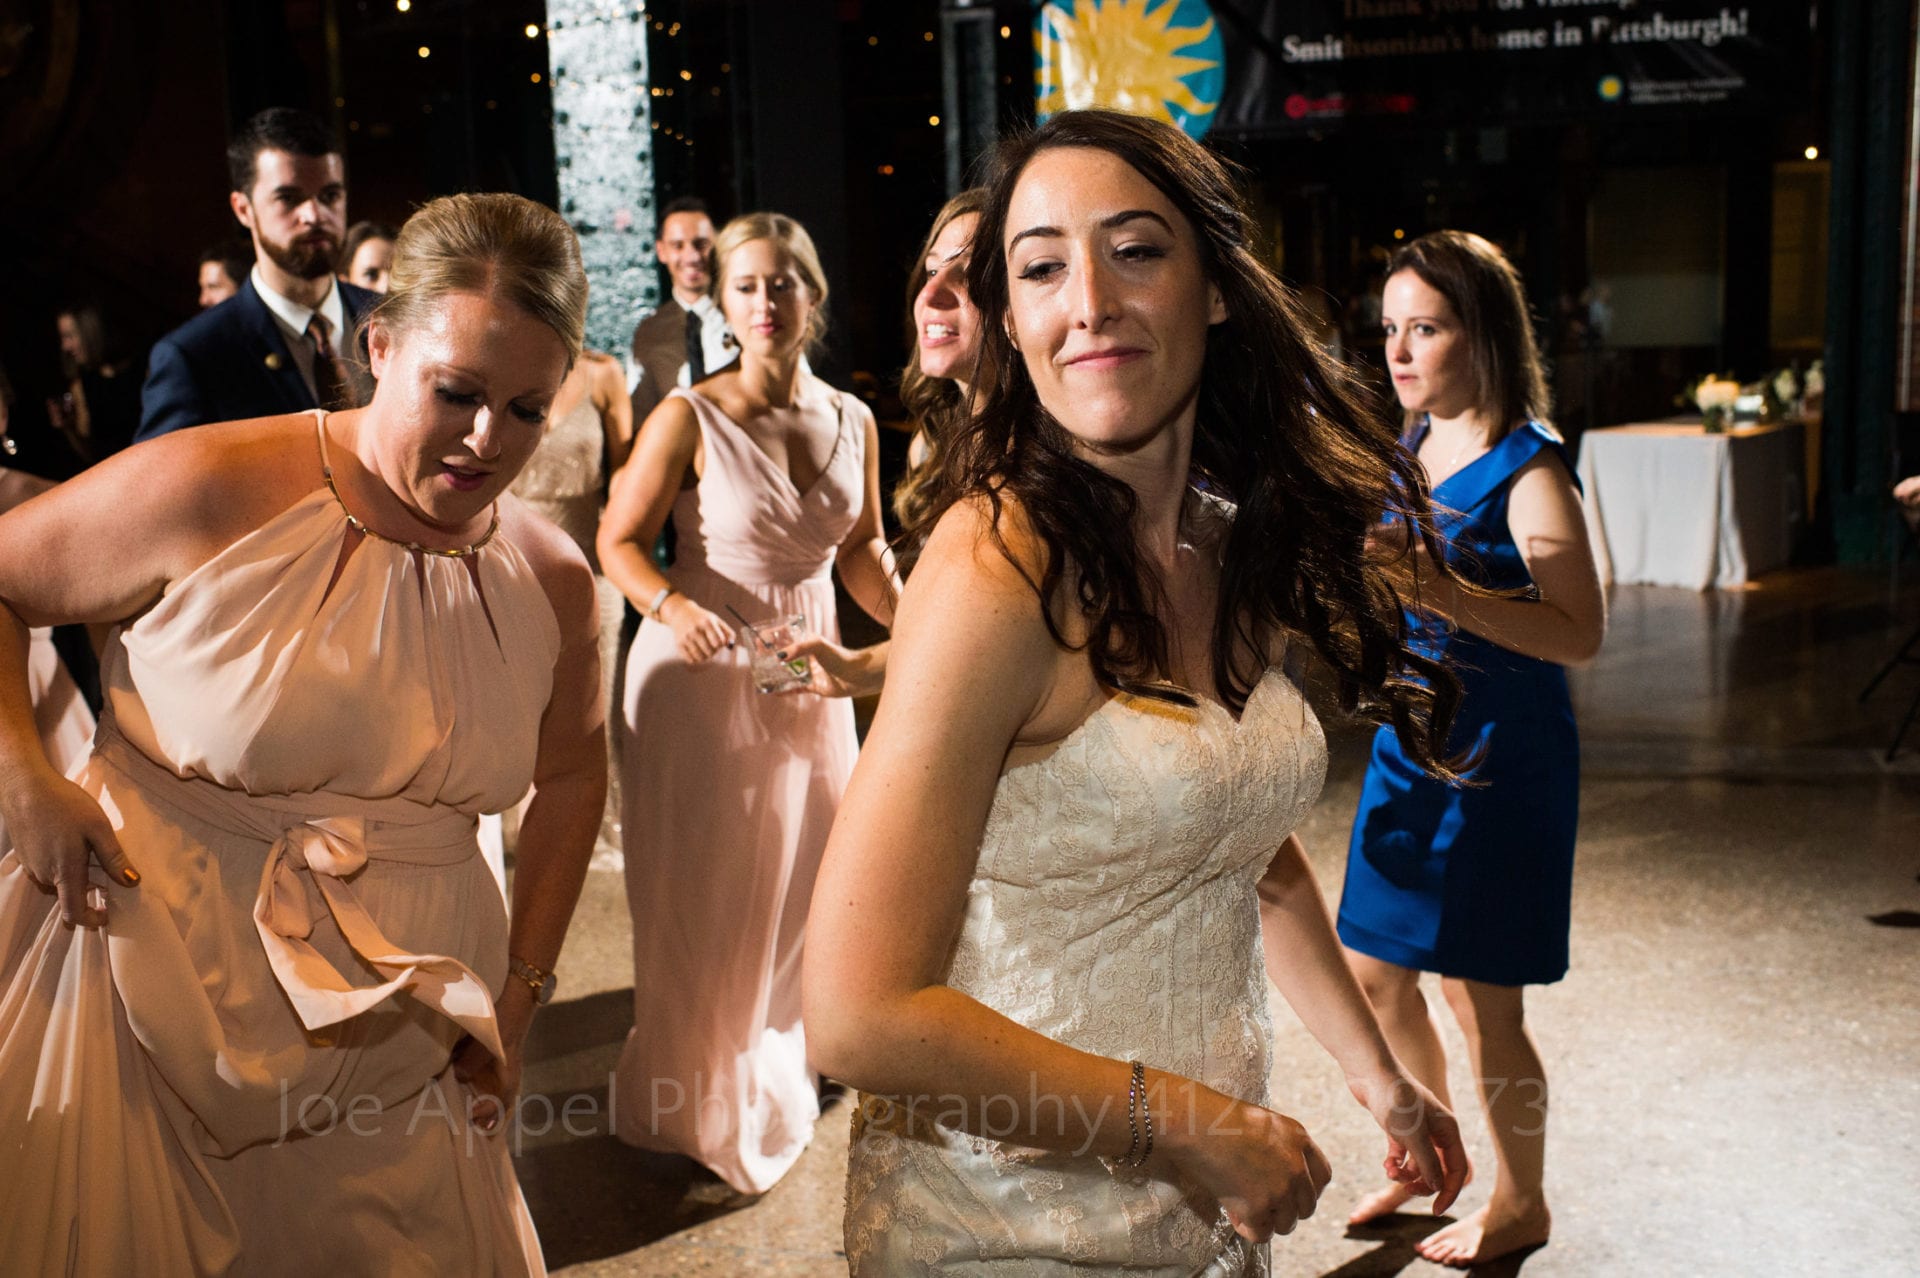 A bride dances with her bridesmaids in the Great Hall at the Heinz History Center.